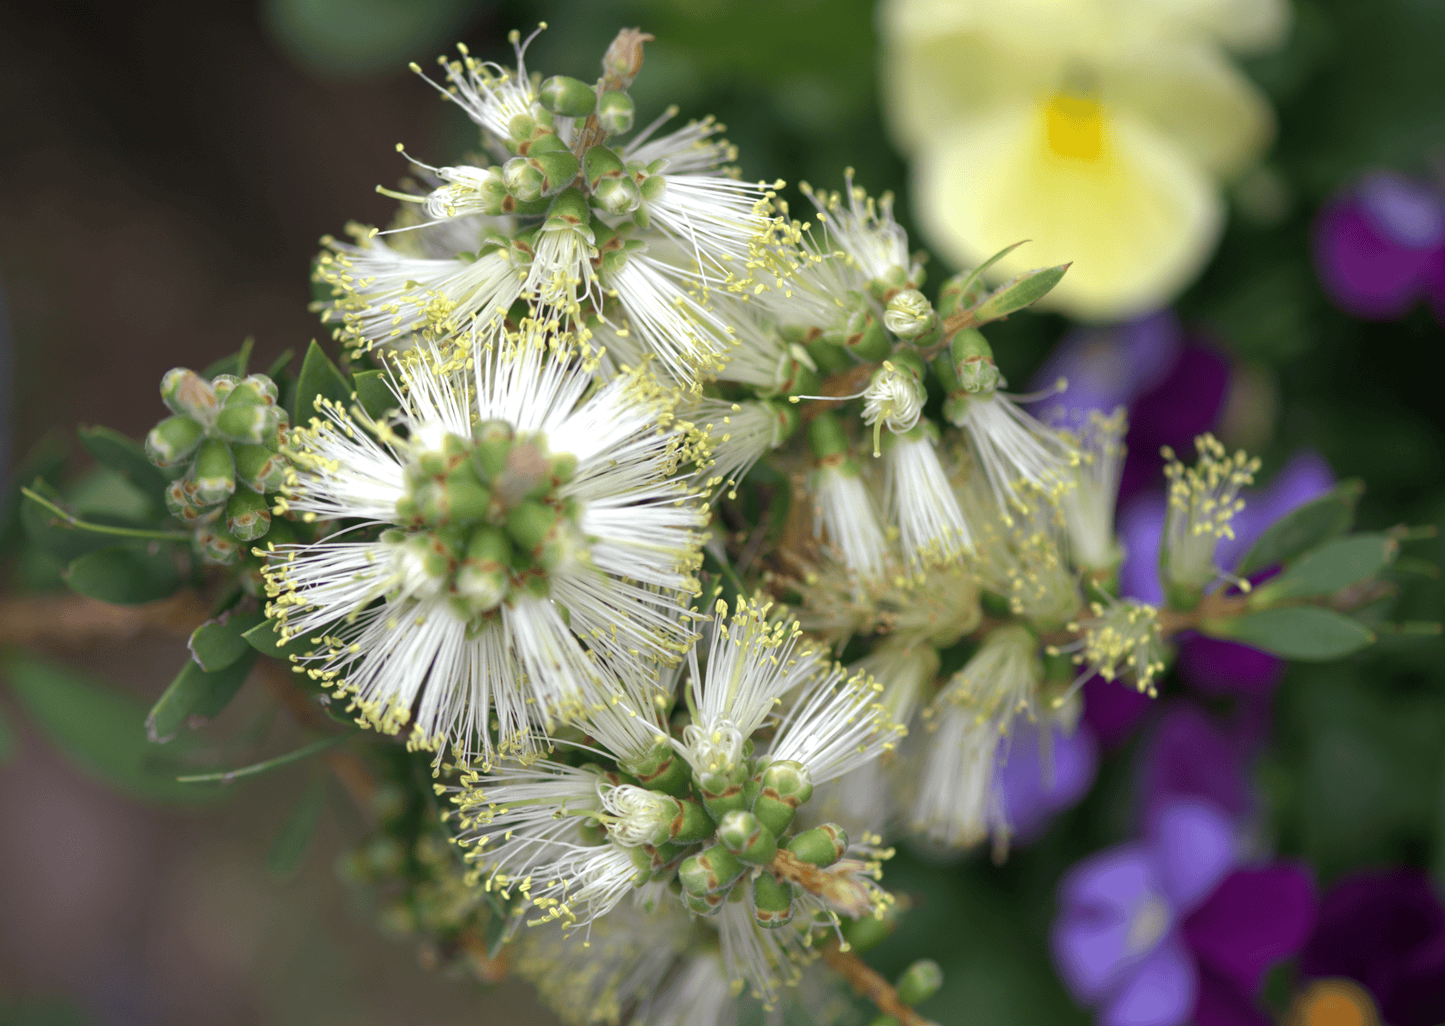 Close up photo of the small green buds and fluffy white flower with yellow tips on the Callistemon citrinus White Anzac